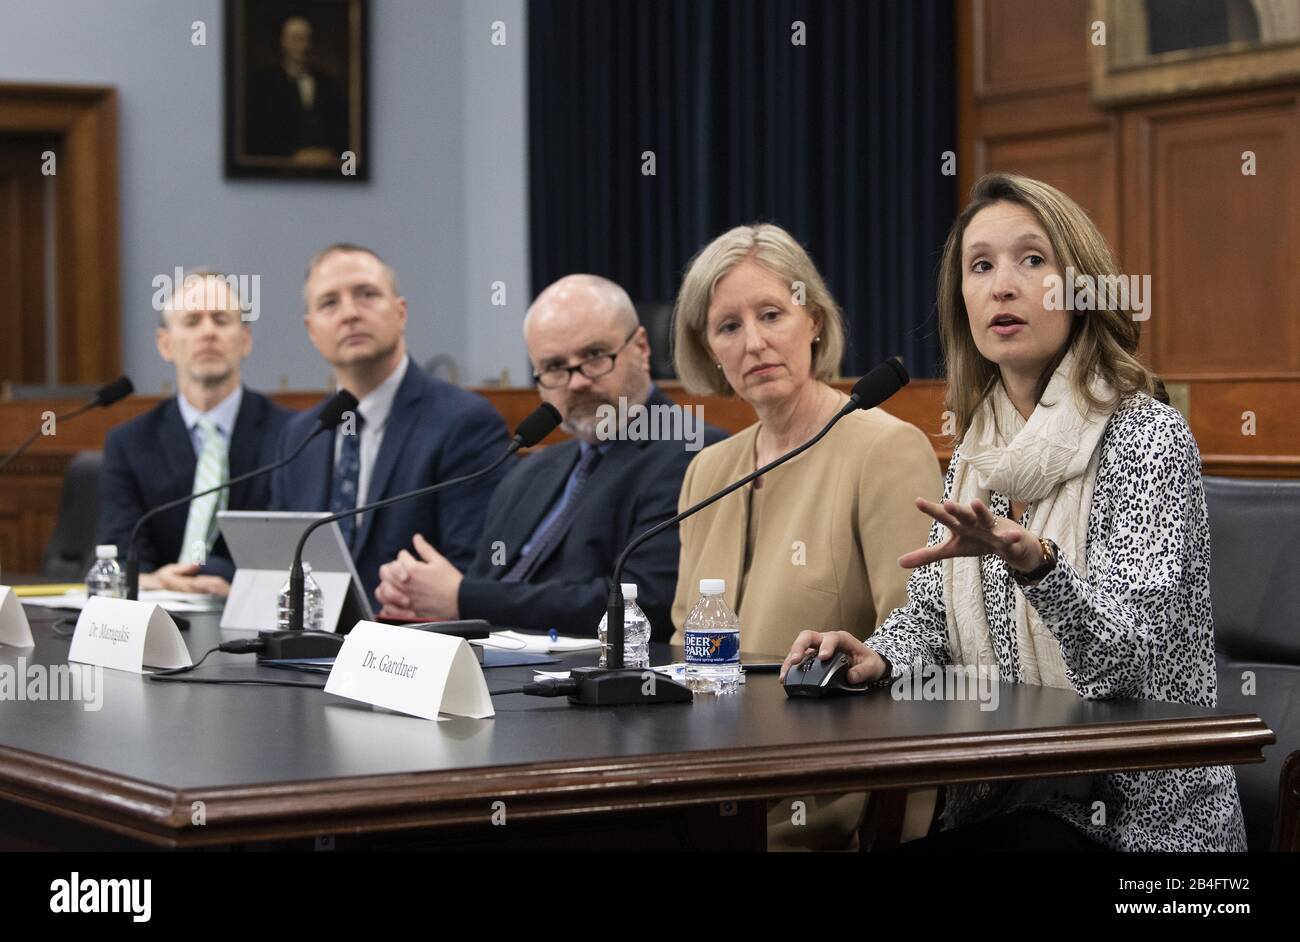 Washington, United States. 06th Mar, 2020. Lauren Gardner (R), co-director of the Center for.Systems Science and Engineering at Johns Hopkins University, speaks on the Coronavirus Tracking Map that her team developed and that is being implemented worldwide to track the spread of the virus, during a briefing on the virus and the best ways to mobilize resources and improve care and response, on Capitol Hill in Washington, DC on March 6, 2020. Credit: UPI/Alamy Live News Stock Photo